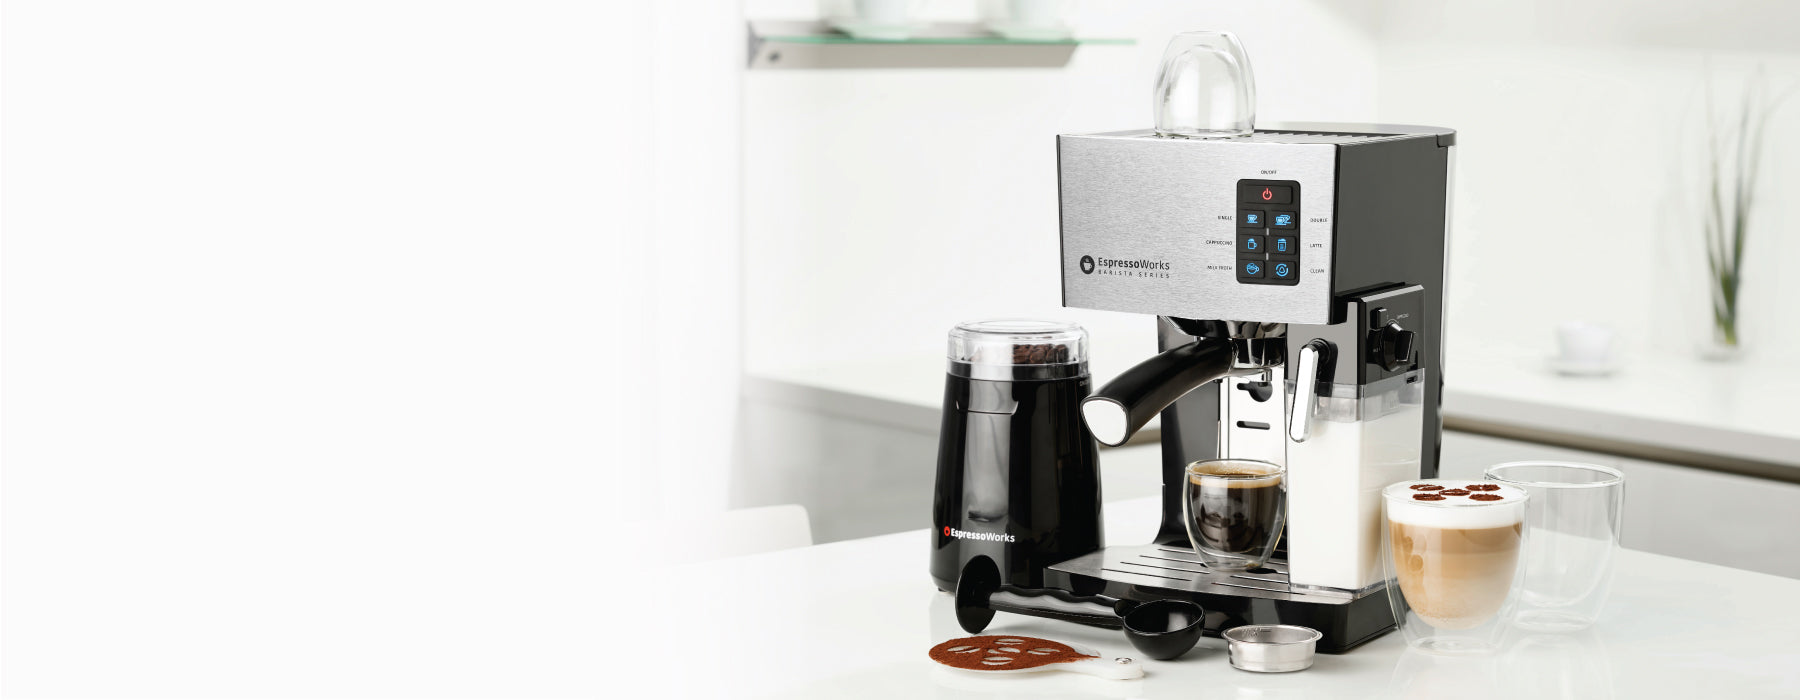 Click on the link to download the user guide for the 10-piece 19-bar EspressoWorks Espresso Machine Stainless Steel